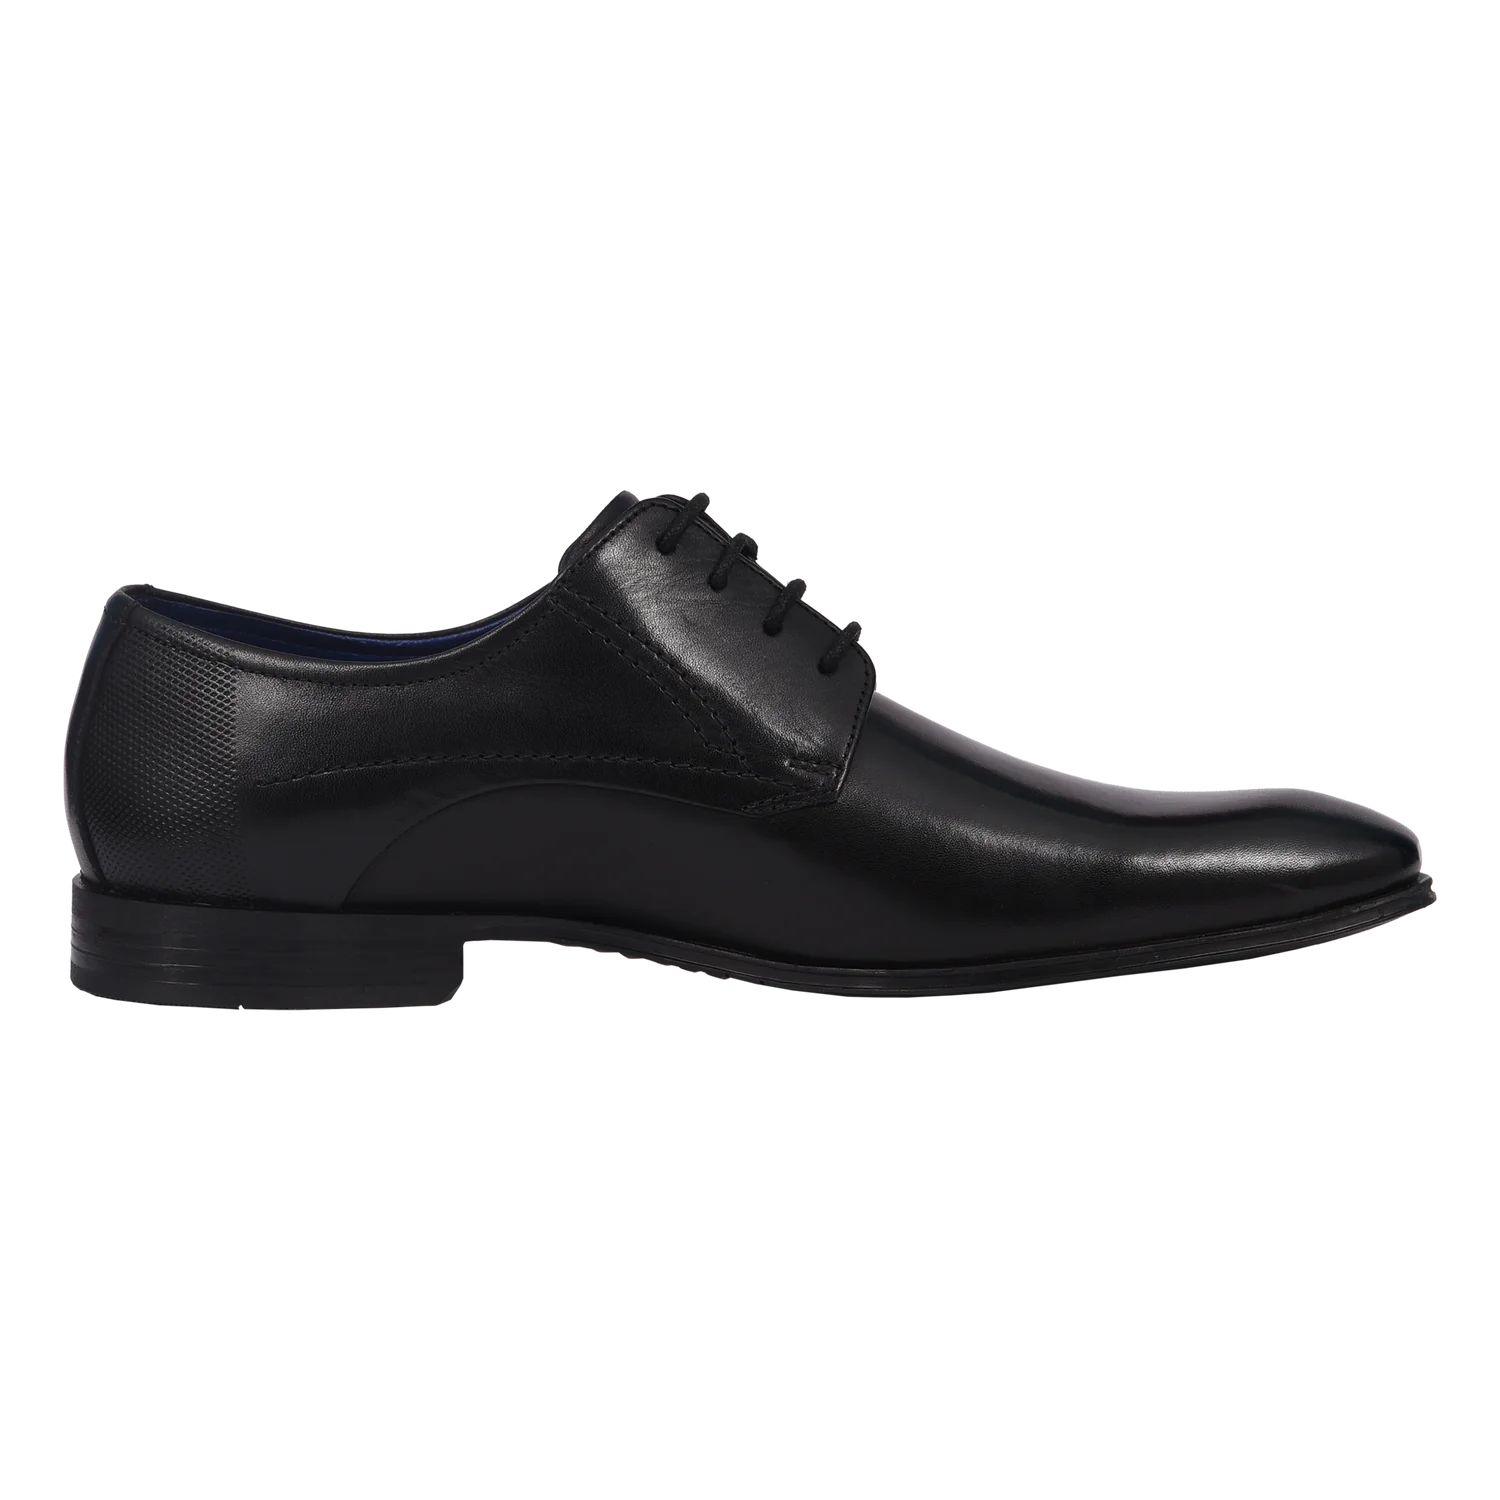 Side view showcasing the shoe's sleek design and lace-up fastening.